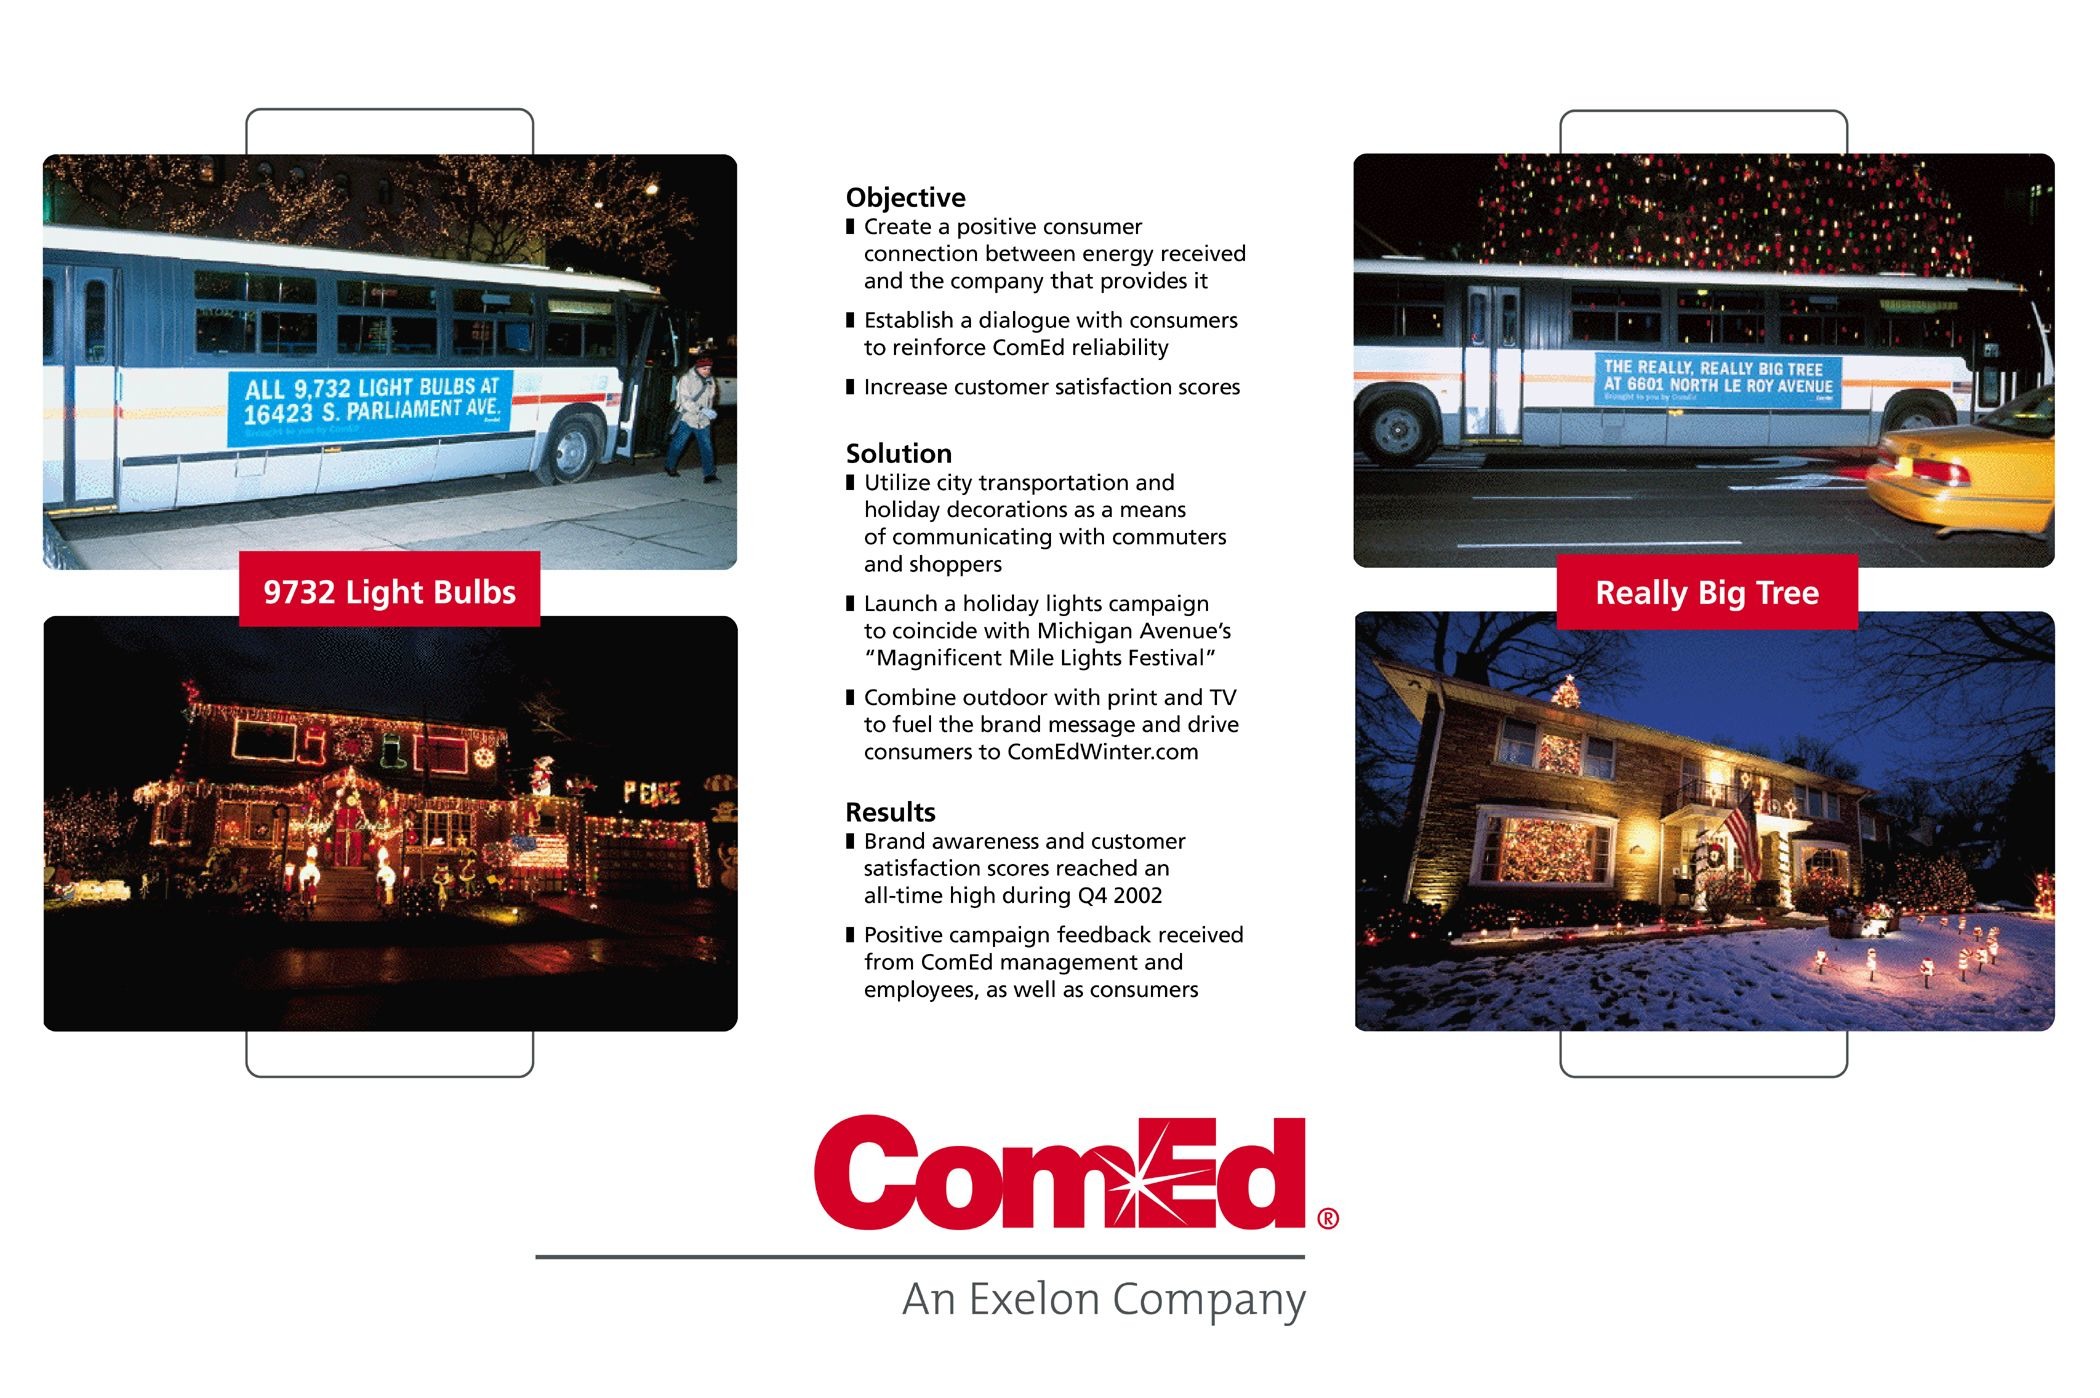 COMED HOLIDAY